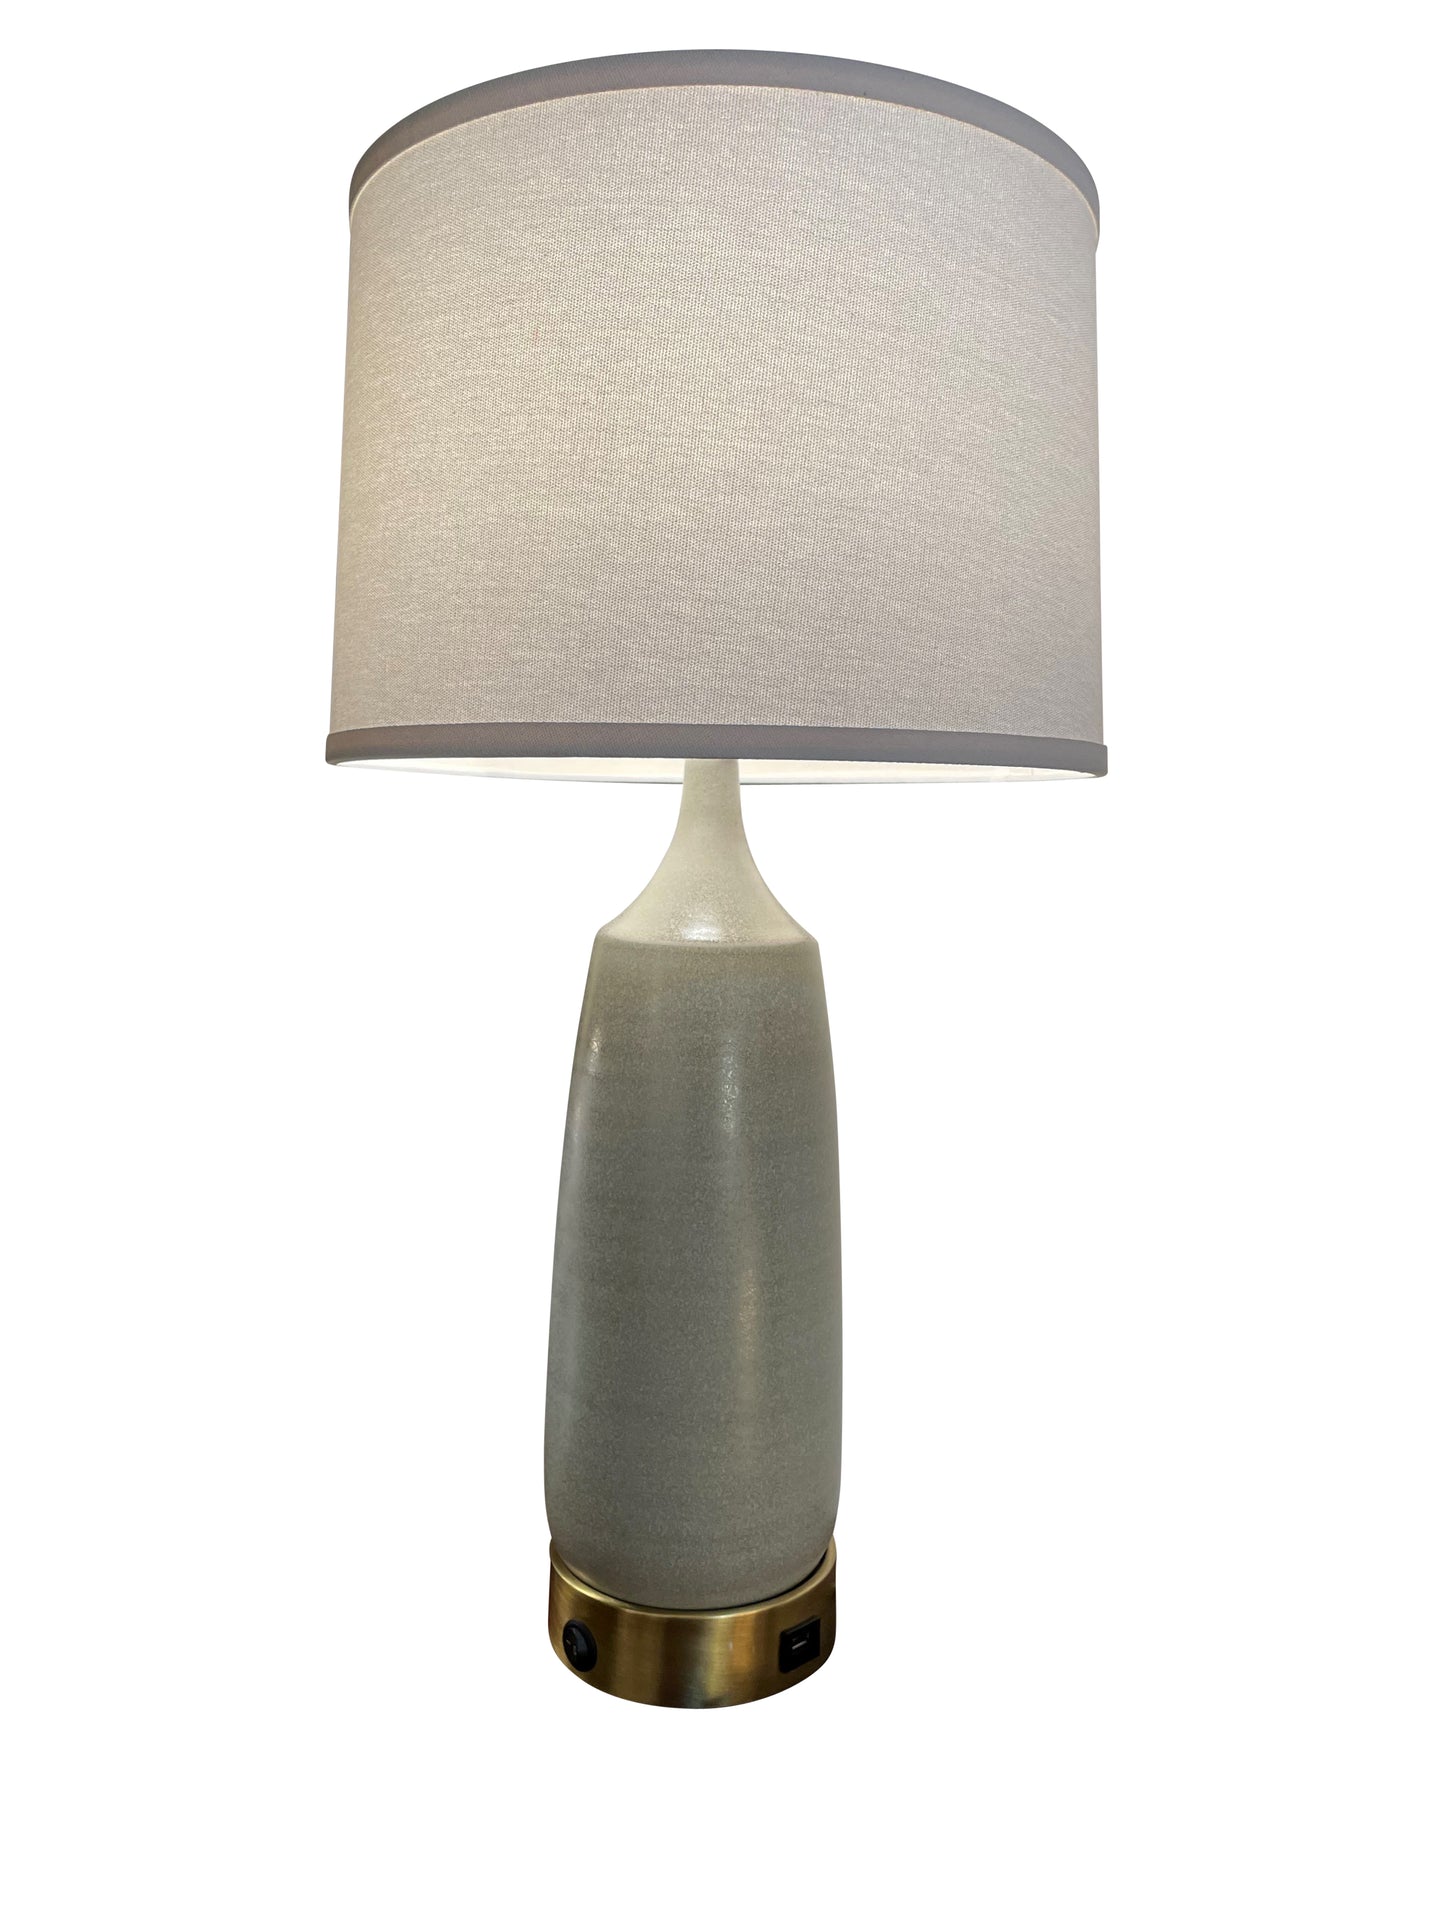 House of Troy Scatchard Table Lamp with AB Metal USB Base in Sand GSB105-SD